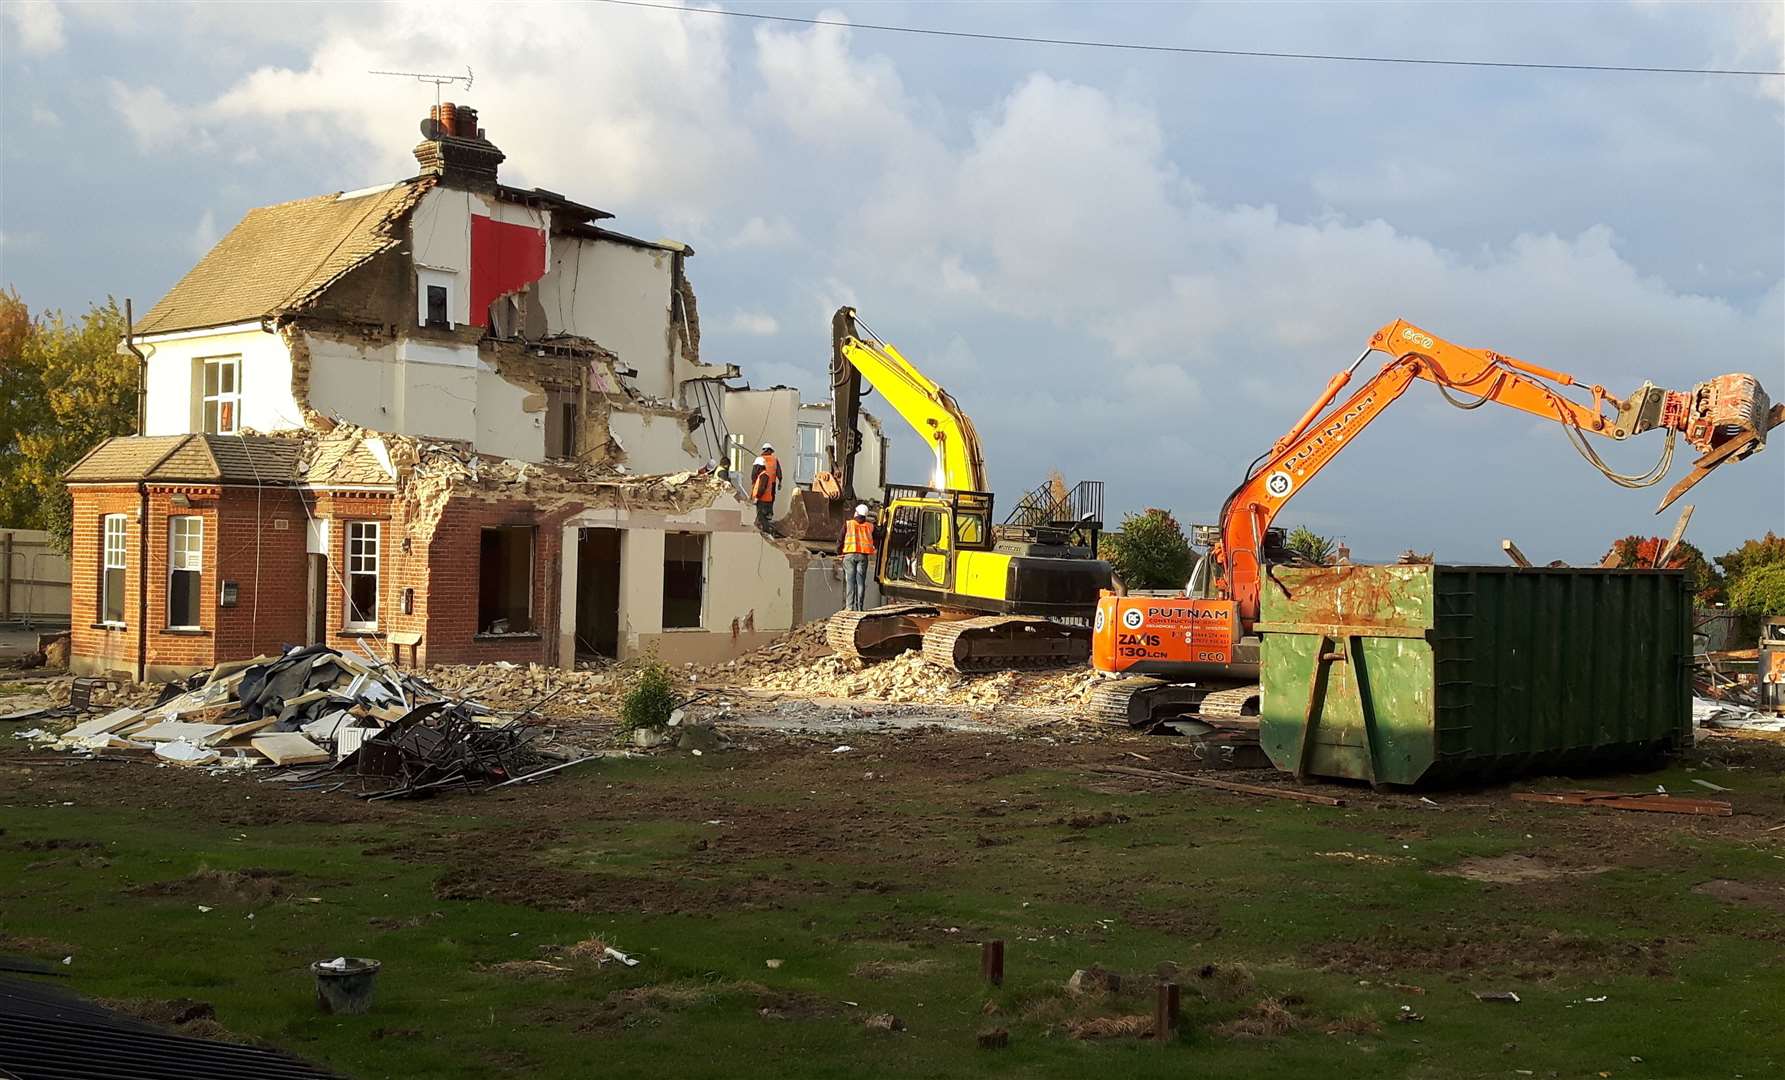 The Battle of Britain pub being illegally demolished without permission.